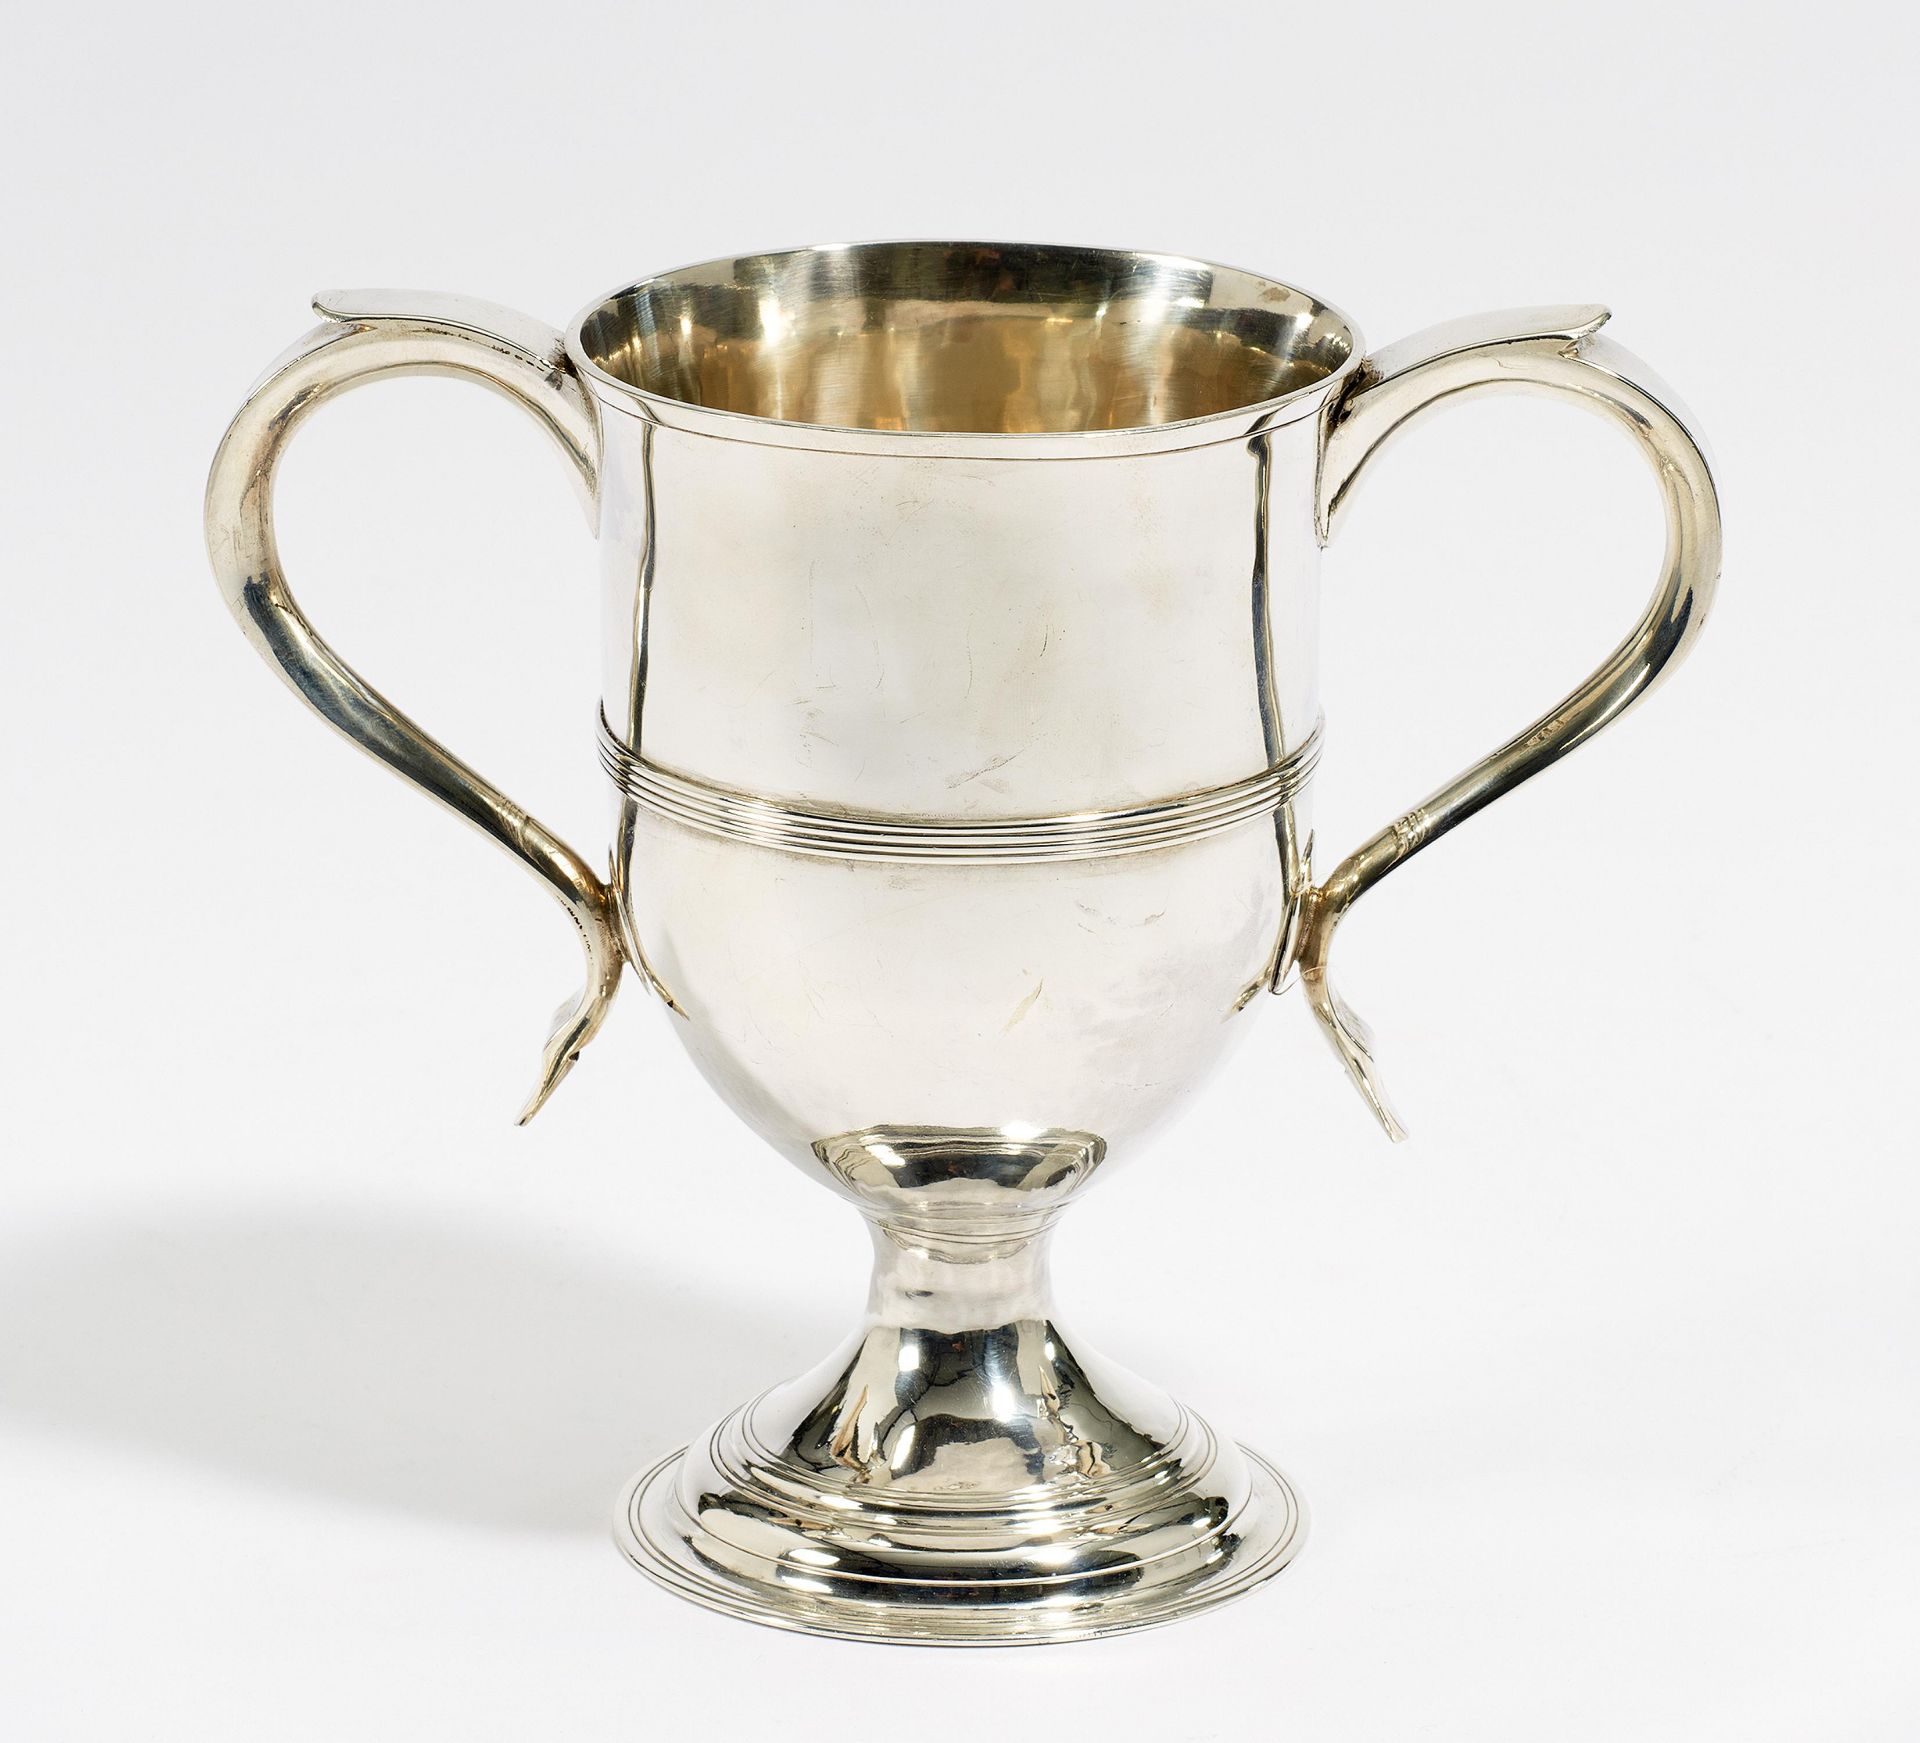 GEORGE III DOUBLE-HANDED SILVER CHALICE. London. 1802-03. Peter, Ann & William I Bateman. Silver.